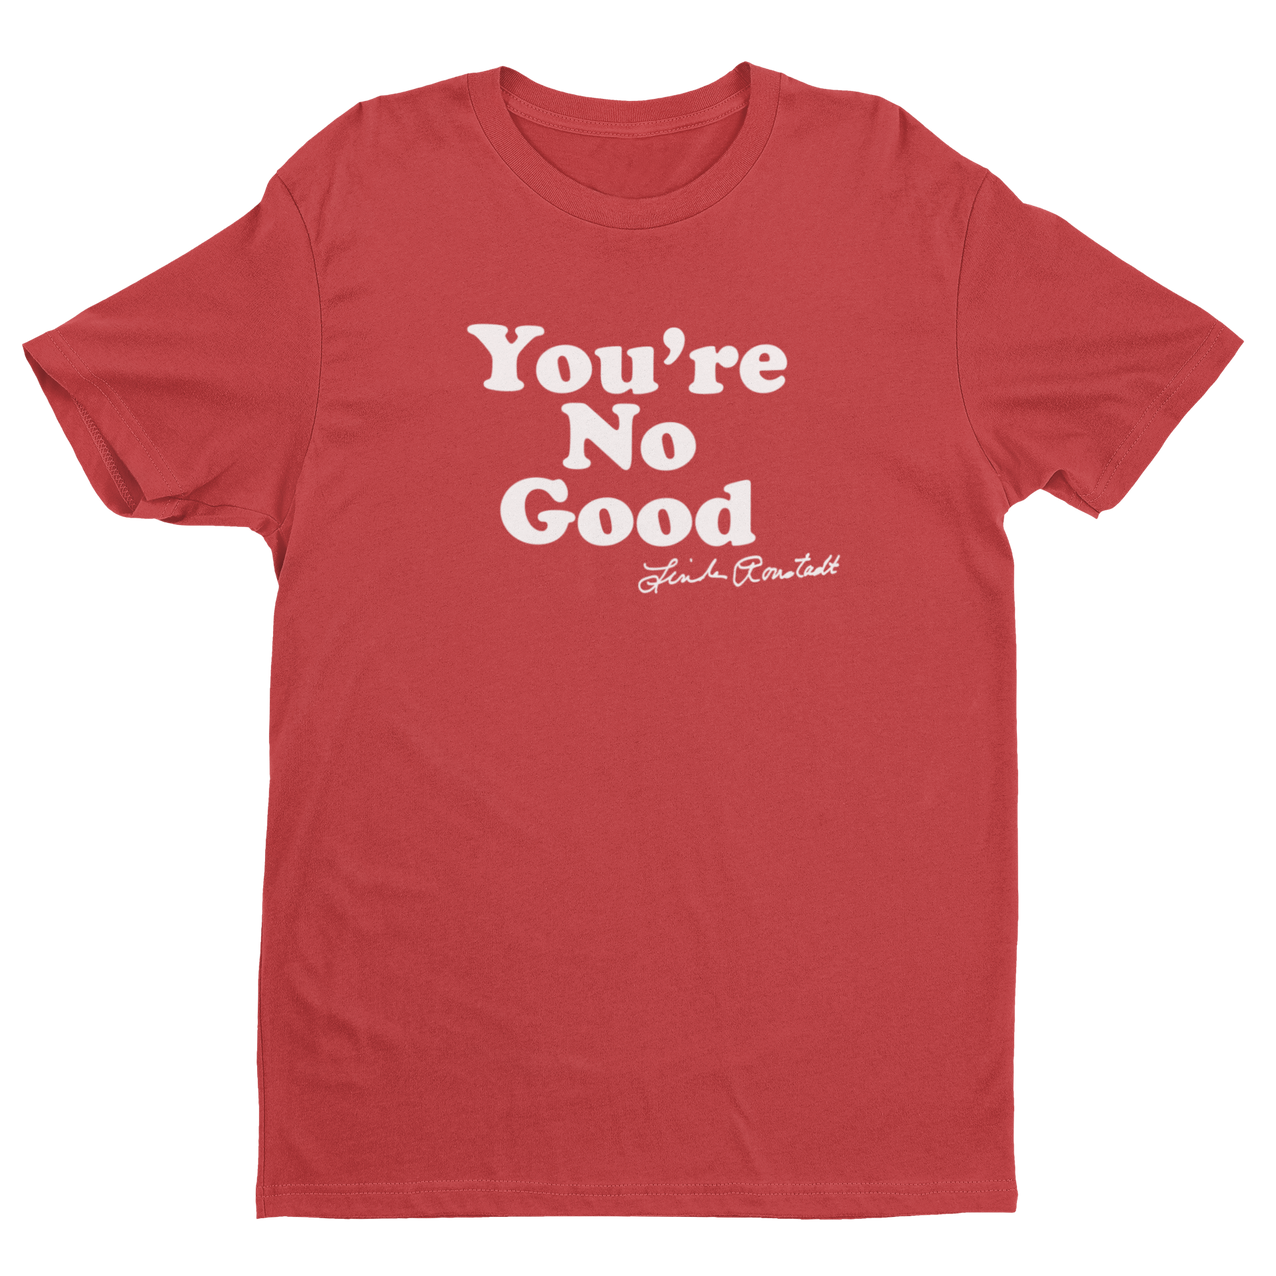 "You're No Good" Tee - Red/White